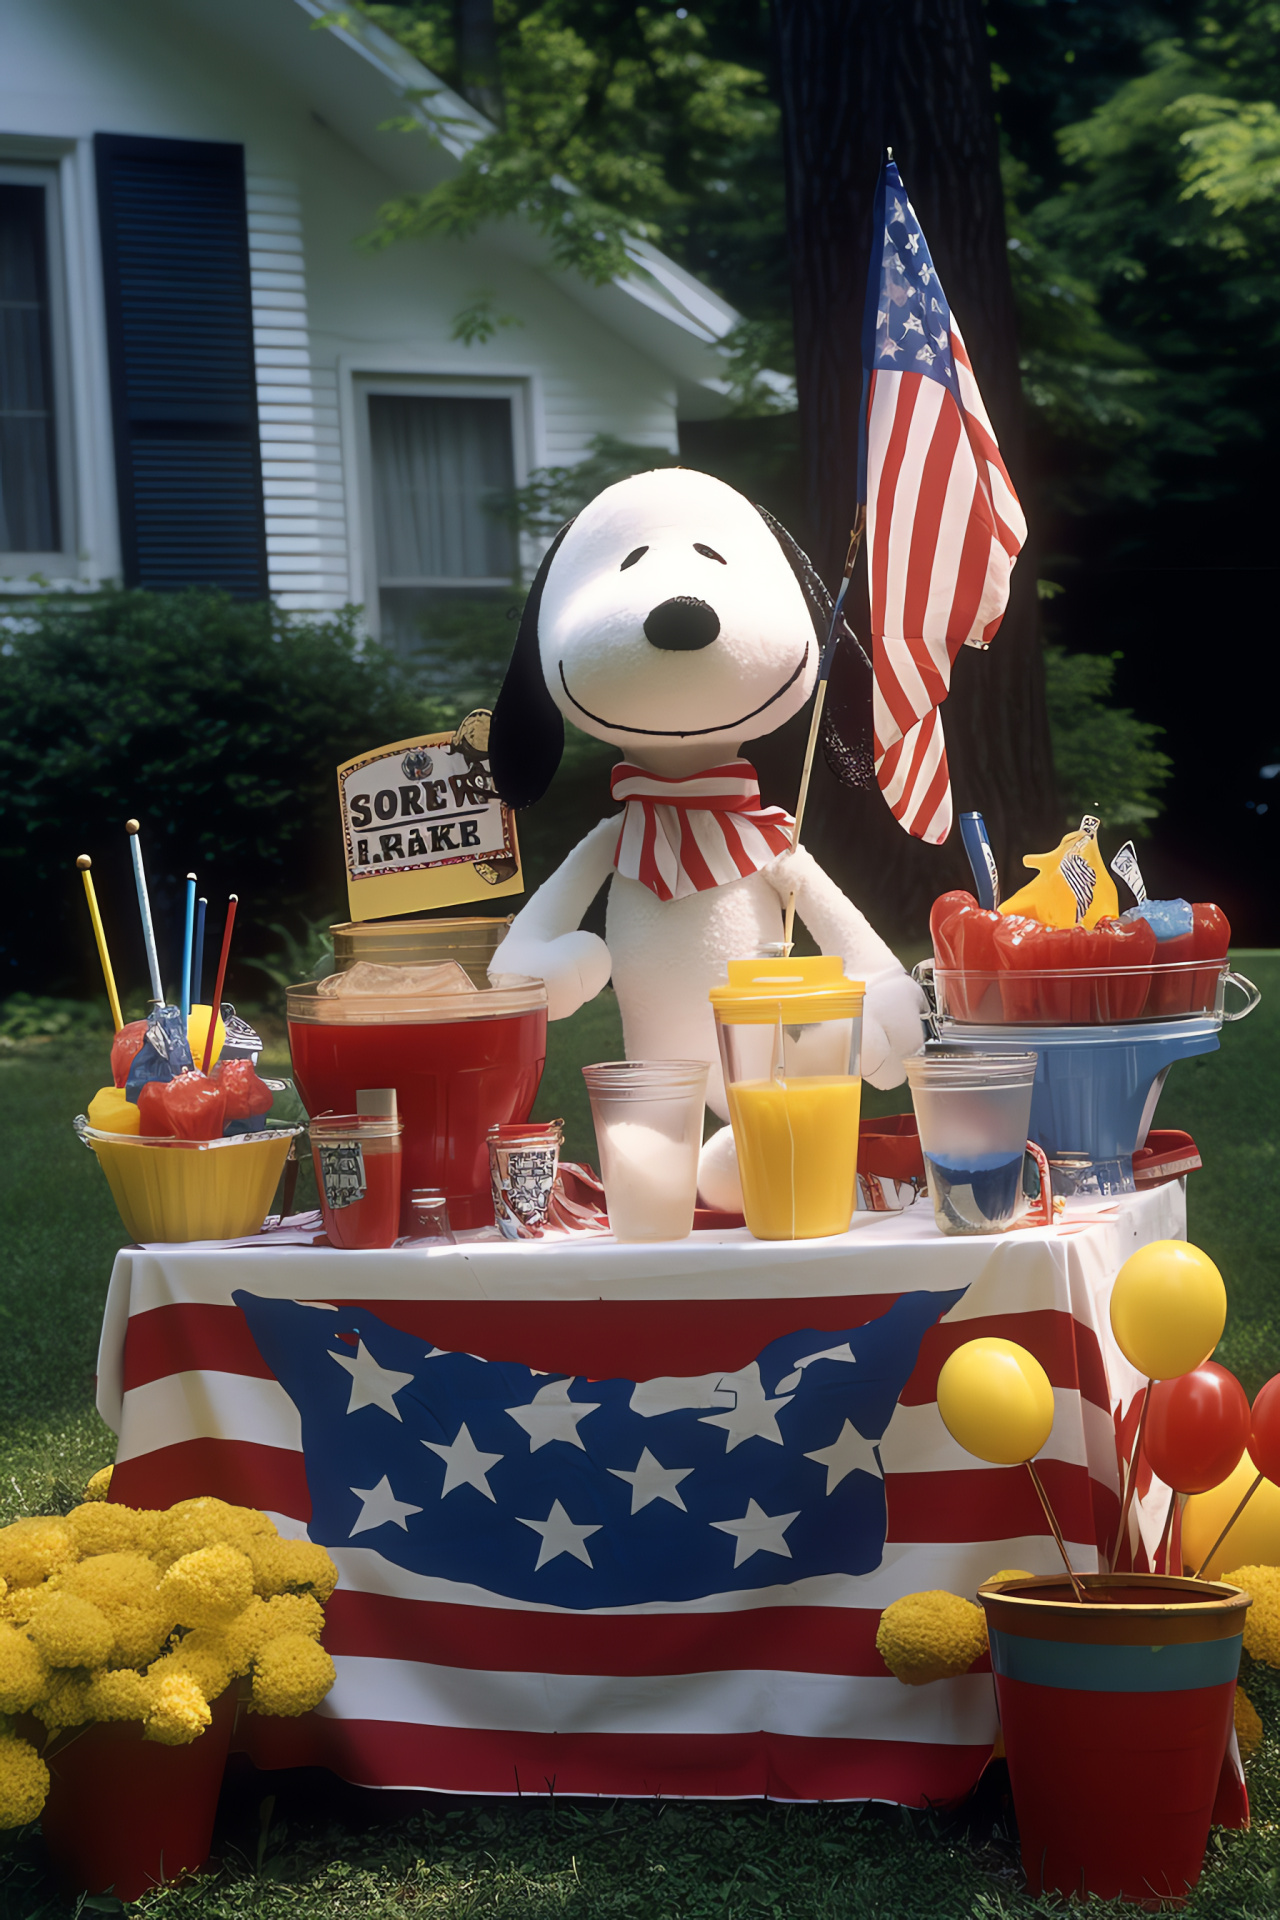 Snoopy dog, Woodstock friend, Fundraising event, July Fourth, Patriotic stand, HD Phone Image